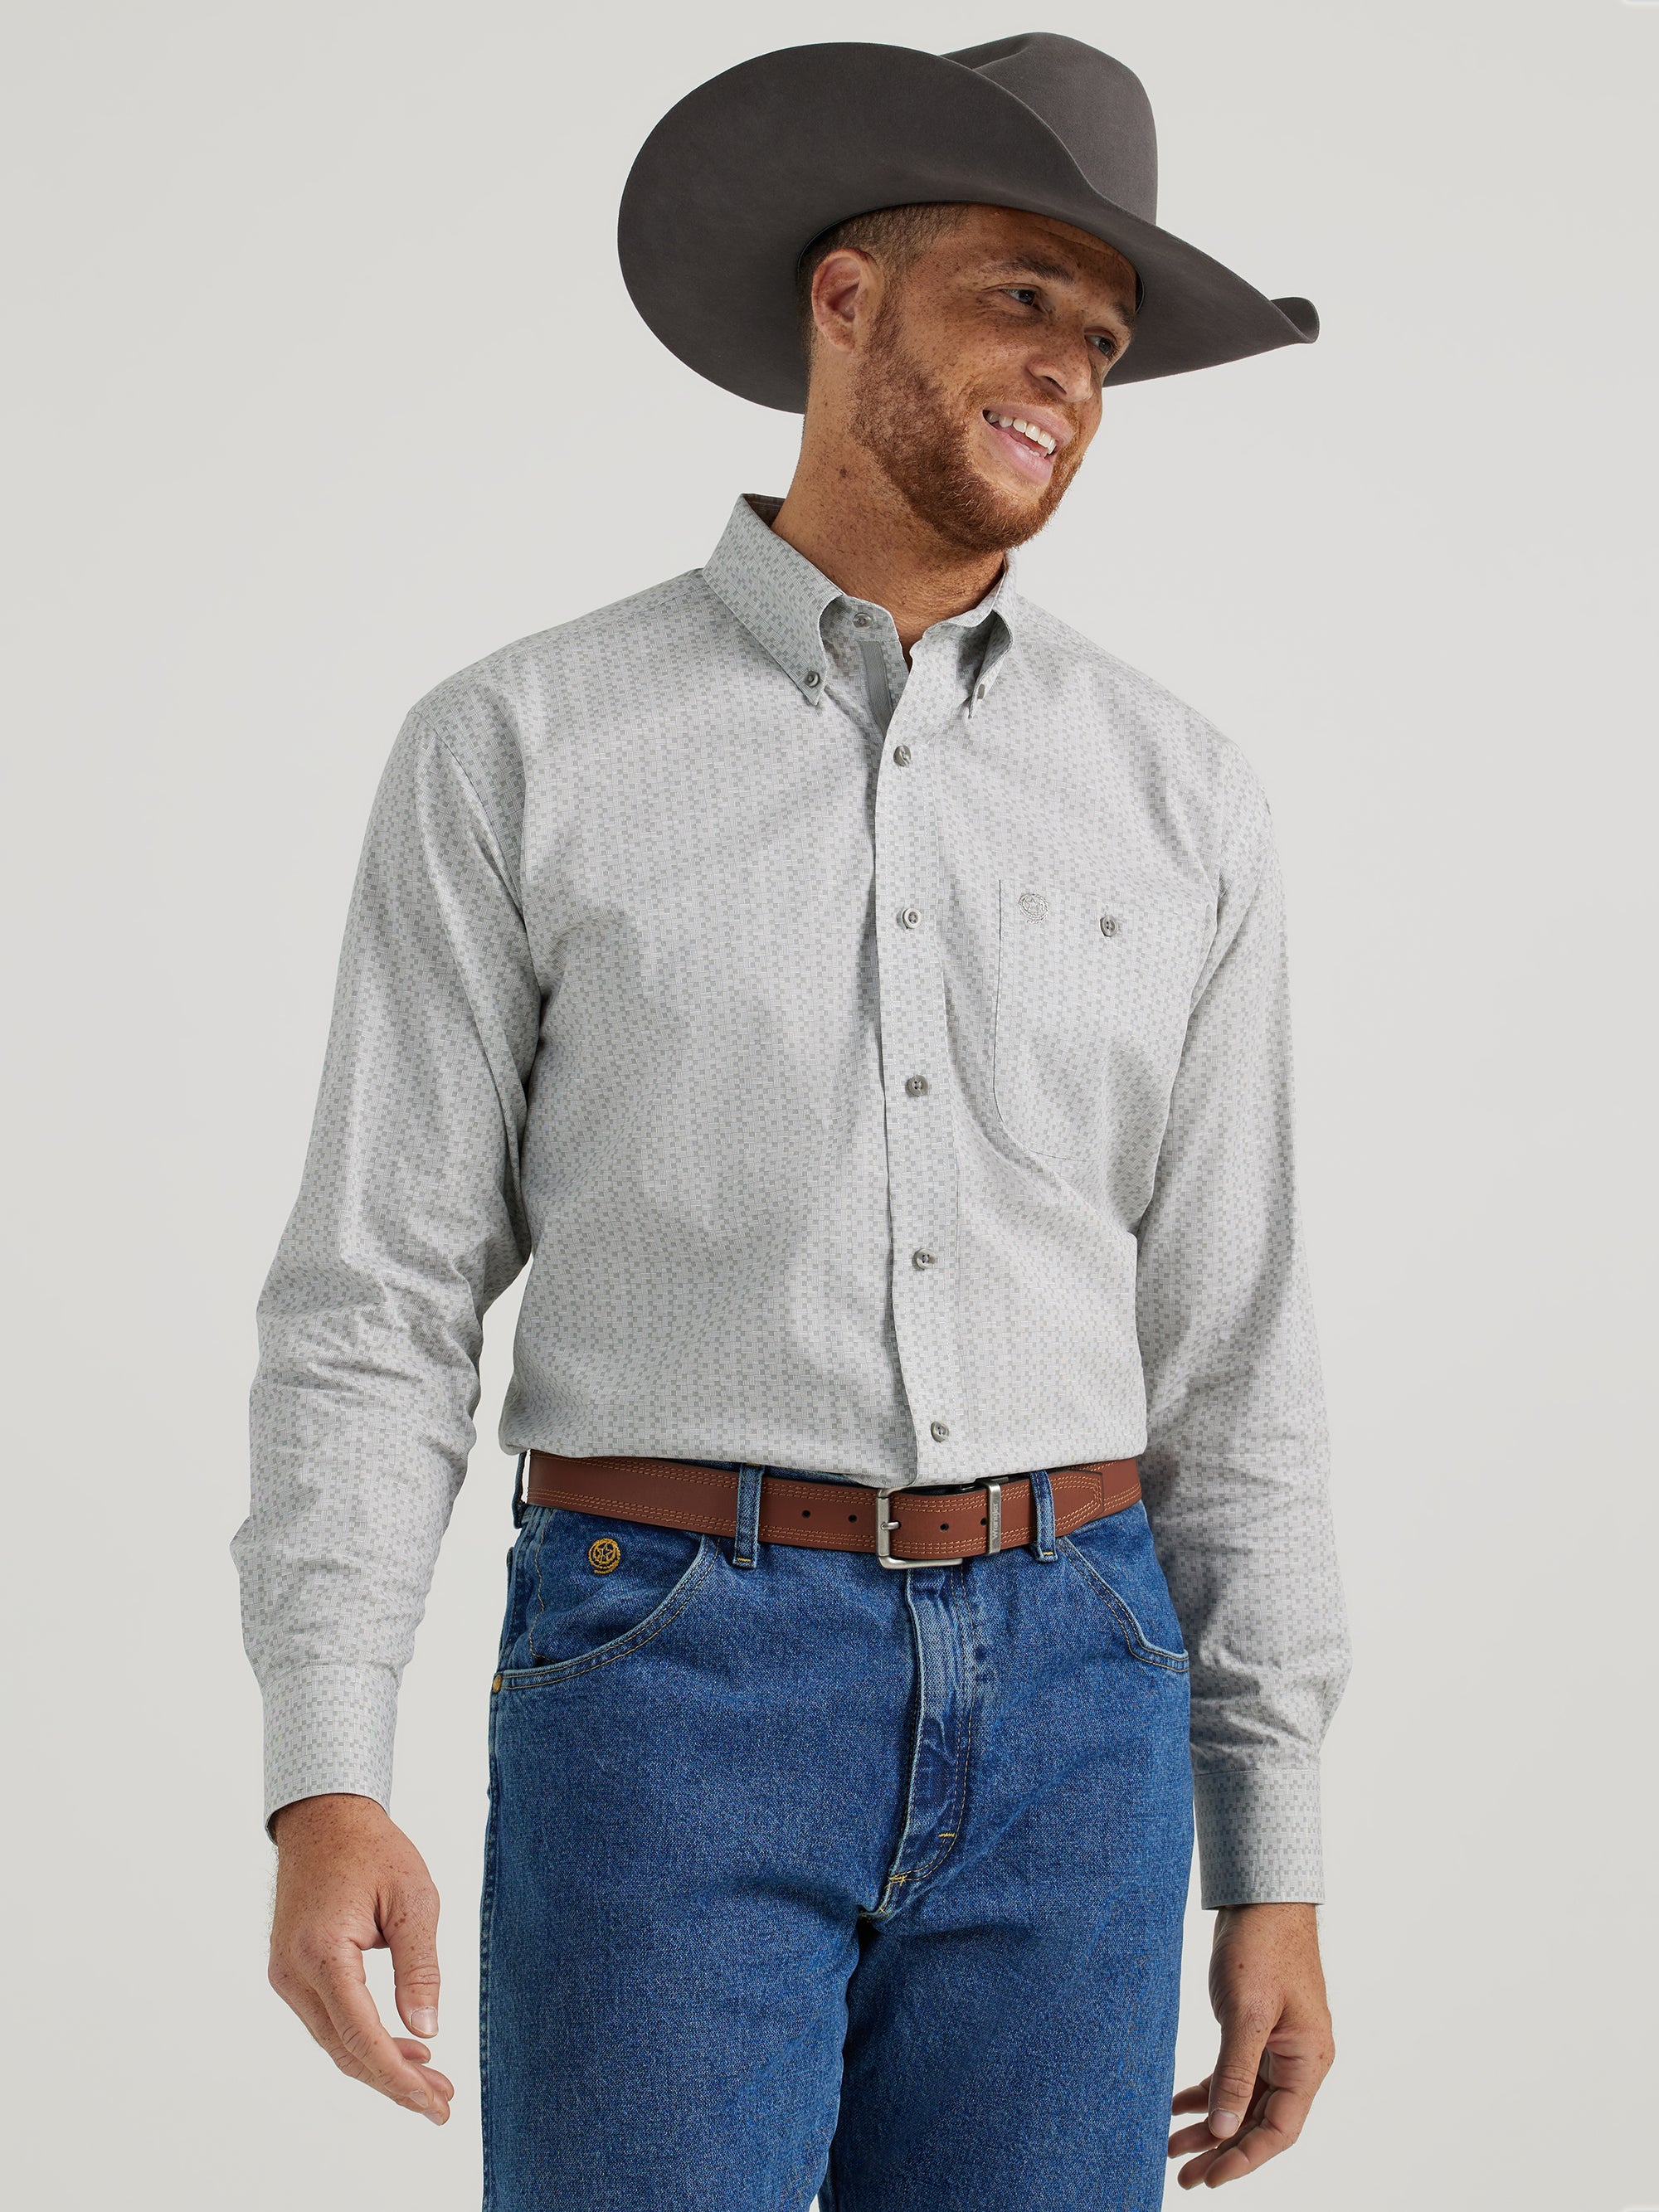 Wrangler Men's George Strait Relaxed Fit Stretch Shirt